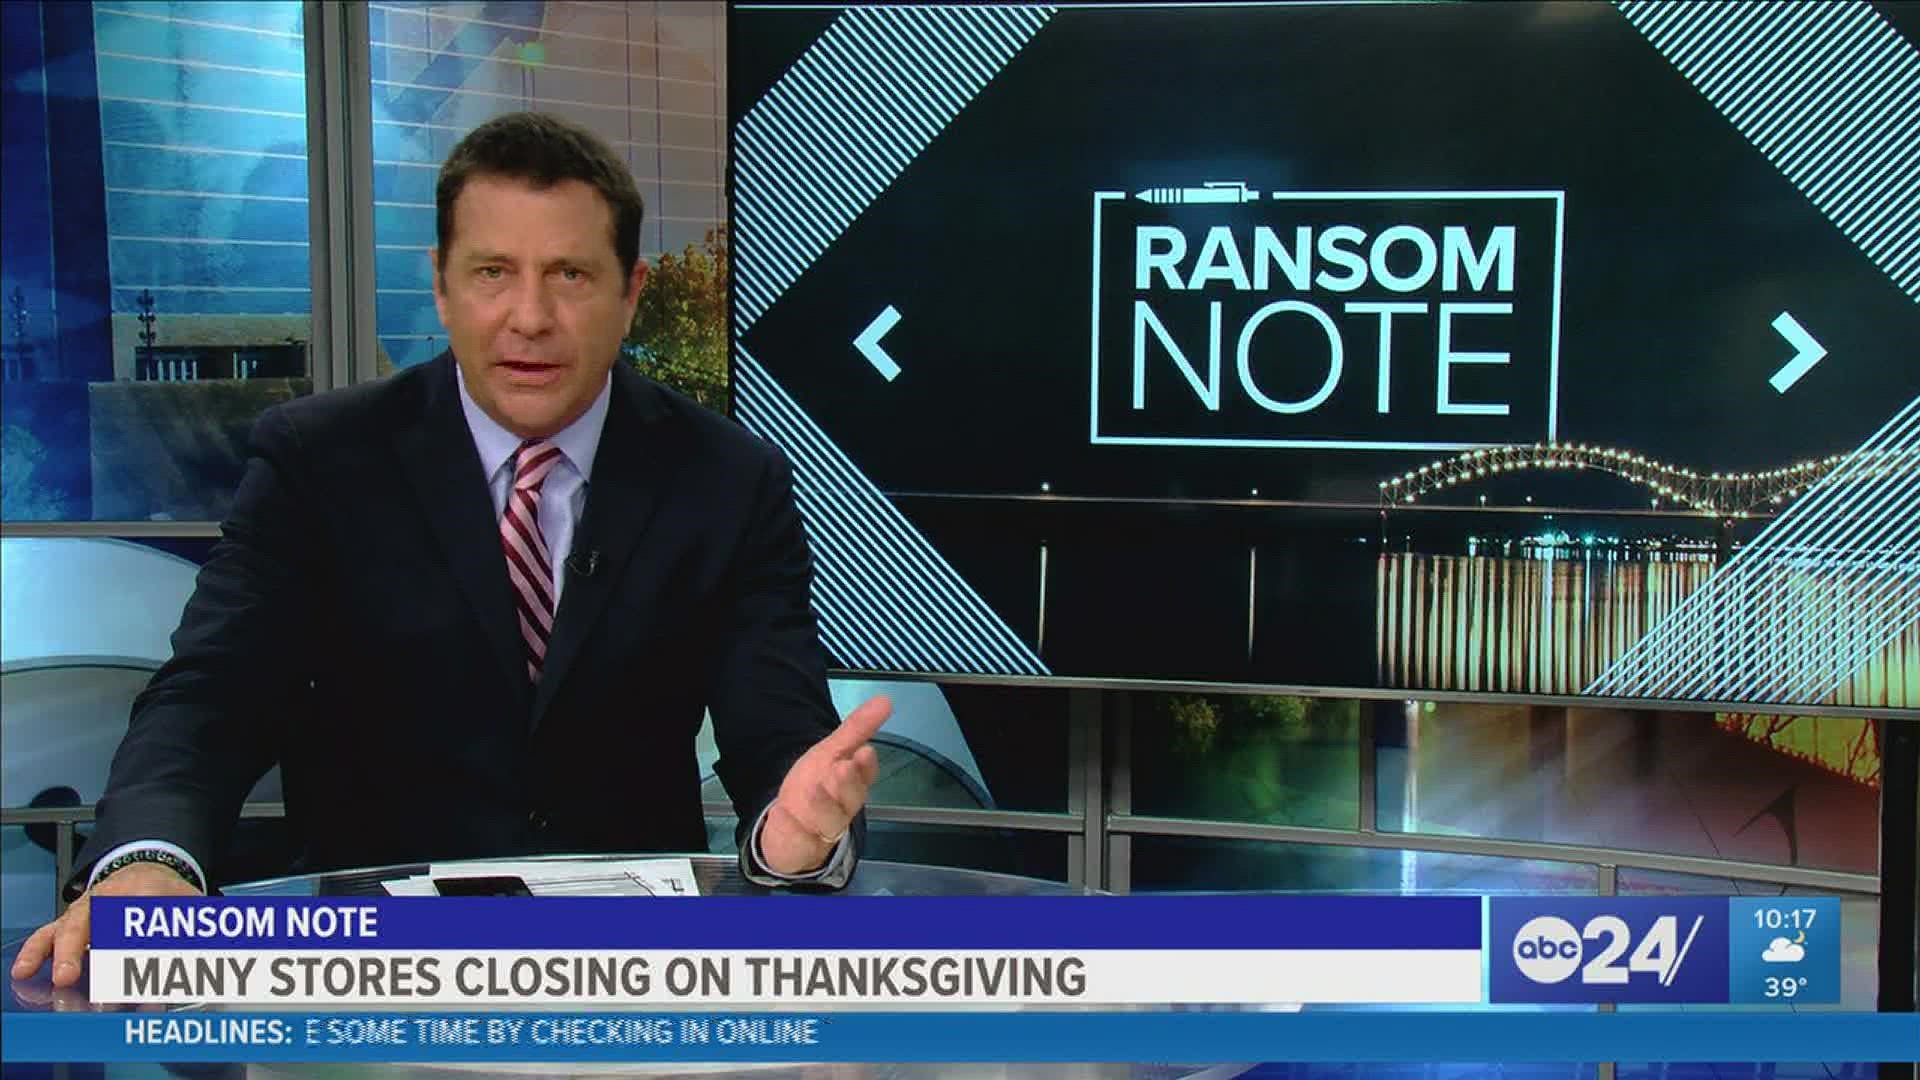 ABC24 Anchor Richard Ransom discusses in his Ransom Note about retail stores deciding to close on Thanksgiving Day.